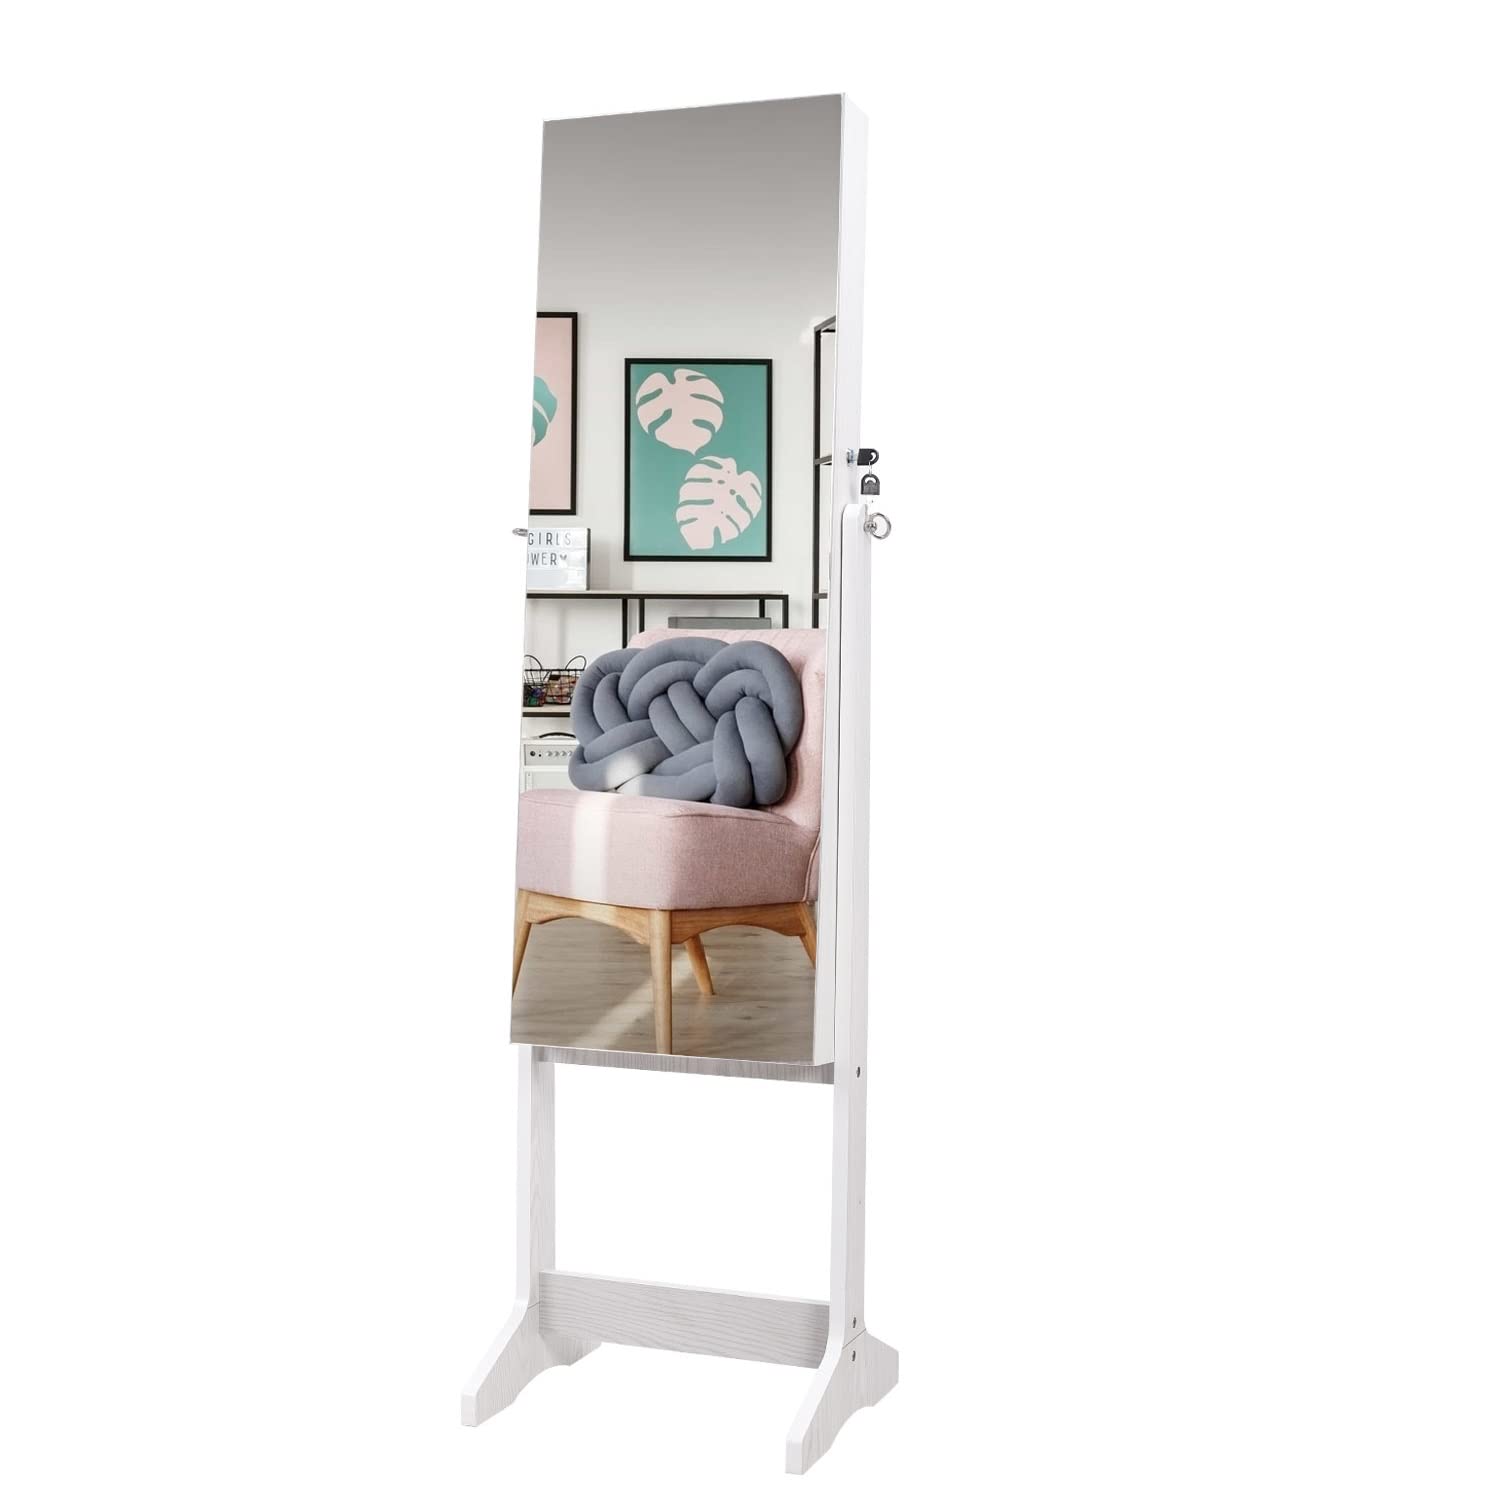 OUTDOOR DOIT Jewelry Organizer Jewelry Cabinet Jewelry armoire Standing Jewelry Box with Full Body Mirror and Large Storage Lockable Wooden Cabinet (White)…